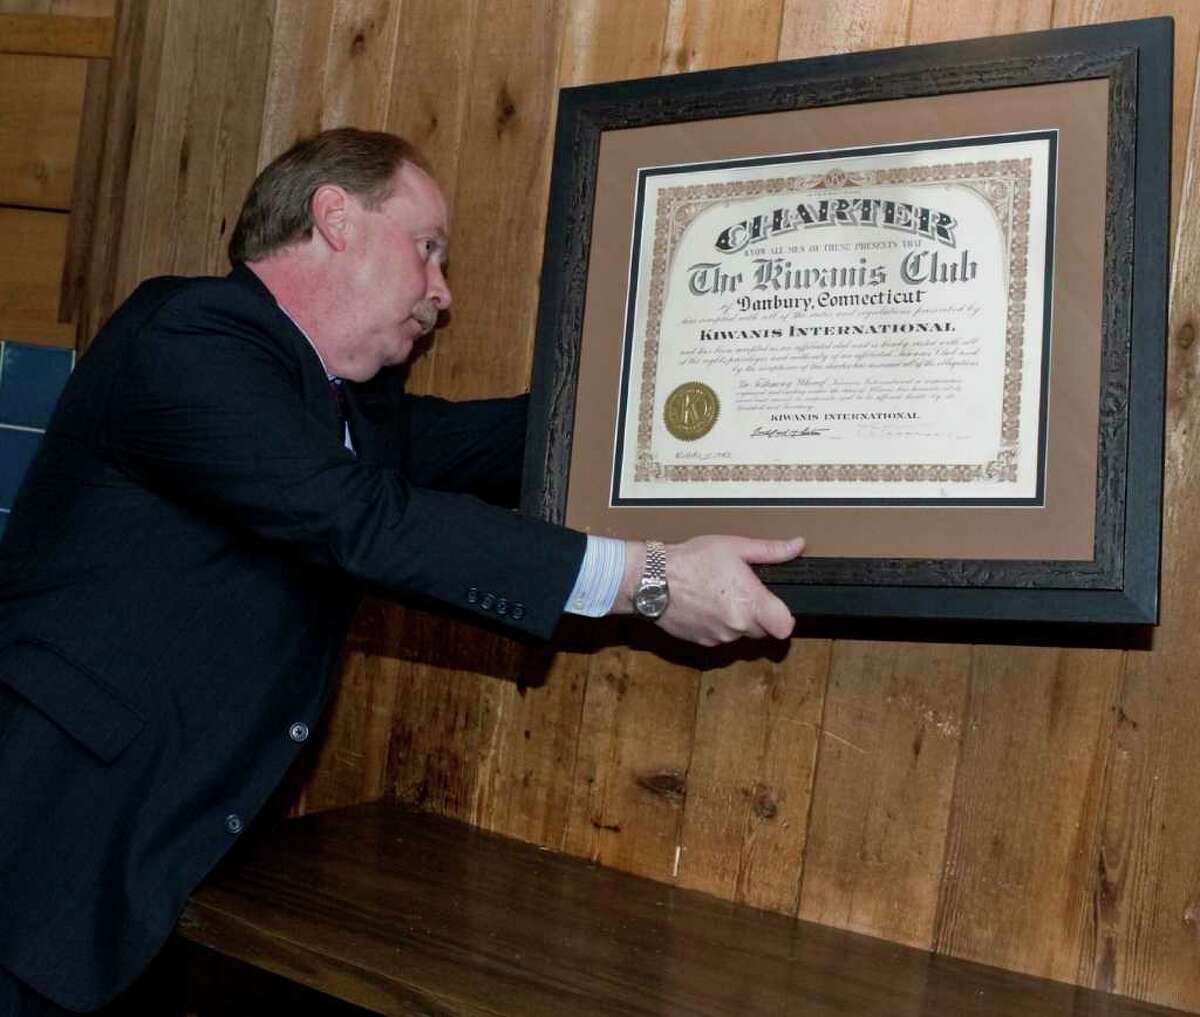 State Sen. Michael McLachlan hangs the original Kiwanis charter from Oct. 15, 1942 in the Tap Room of Chuck's Steak House. State Sen. McLachlan presented it to club members following their weekly Tuesday luncheon at Chuck's Steak House. Tuesday, Nov. 30, 2010